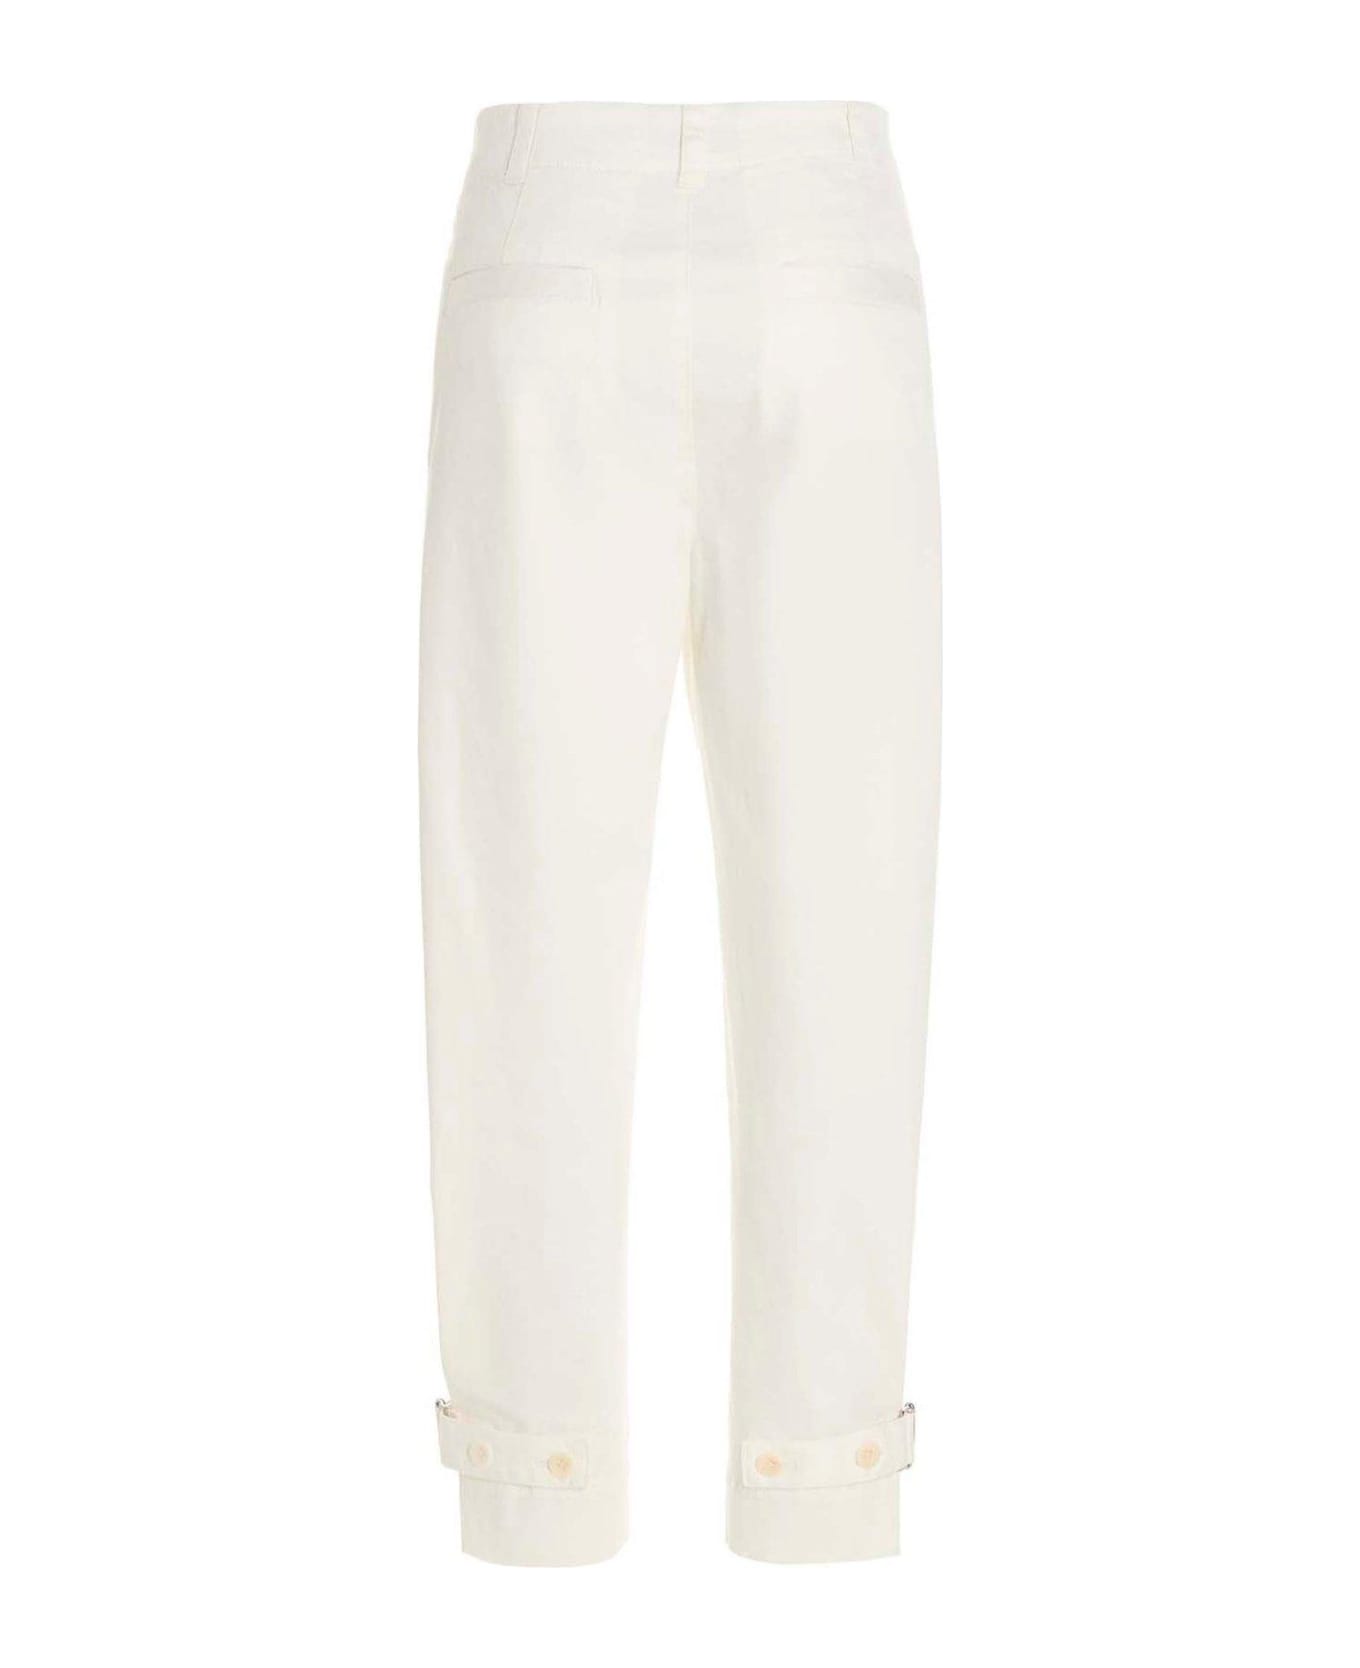 Proenza Schouler White Label Cropped Twill Trousers - White